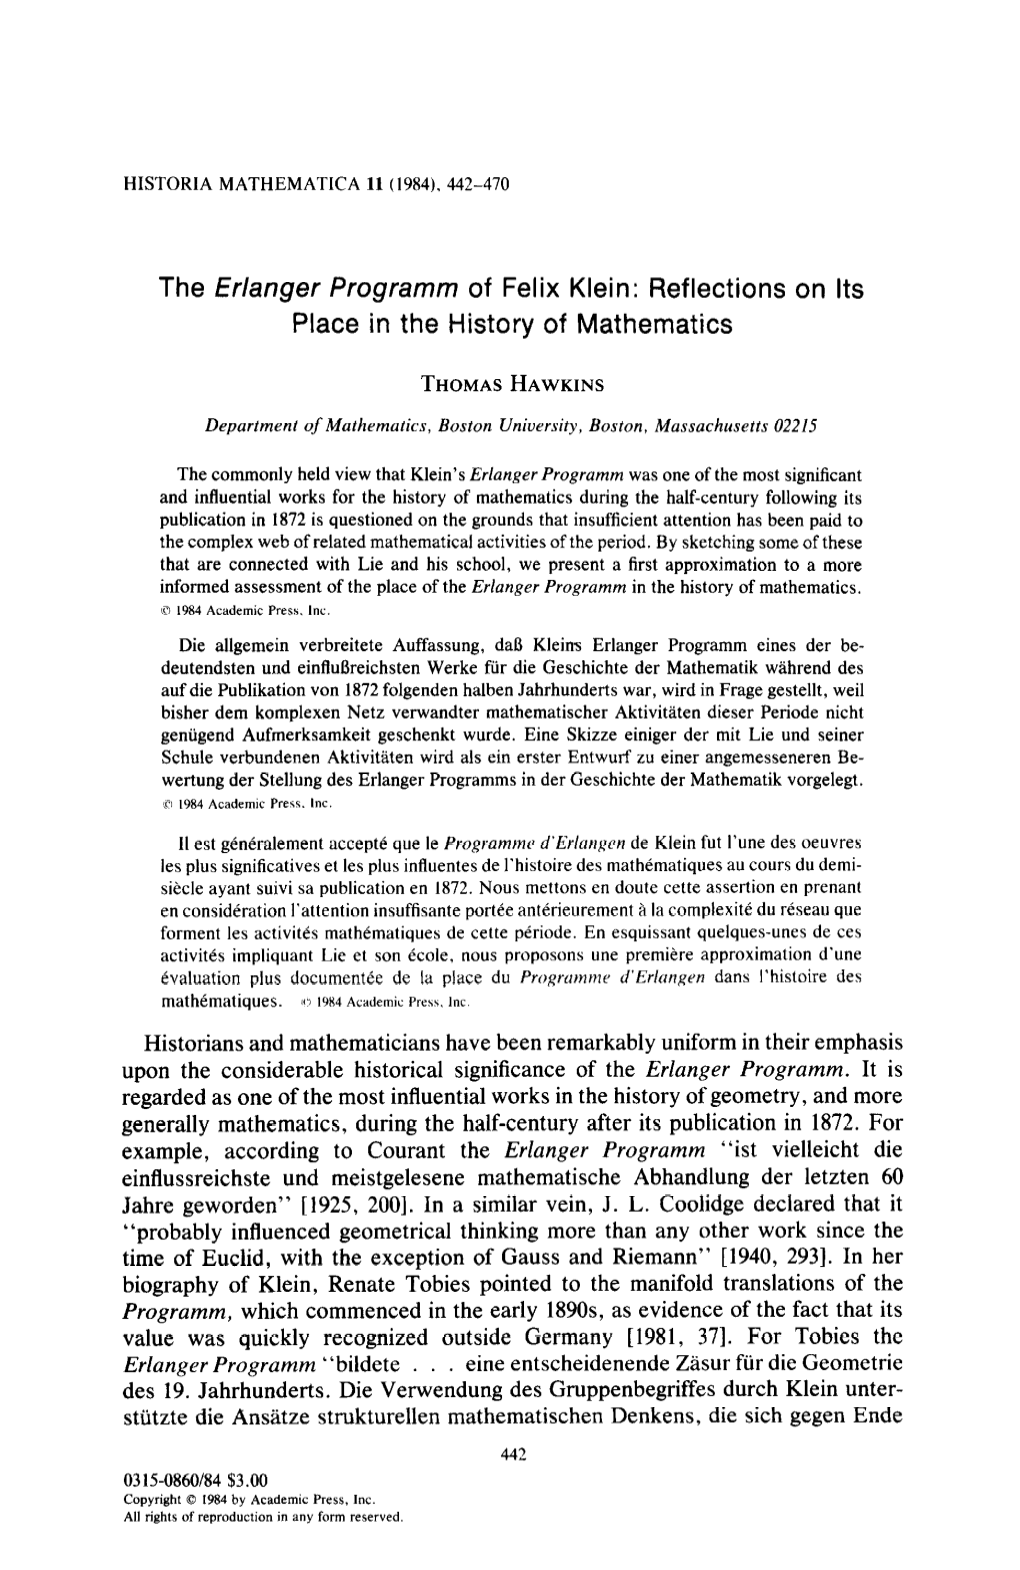 Of Felix Klein: Reflections on Its Place in the History of Mathematics